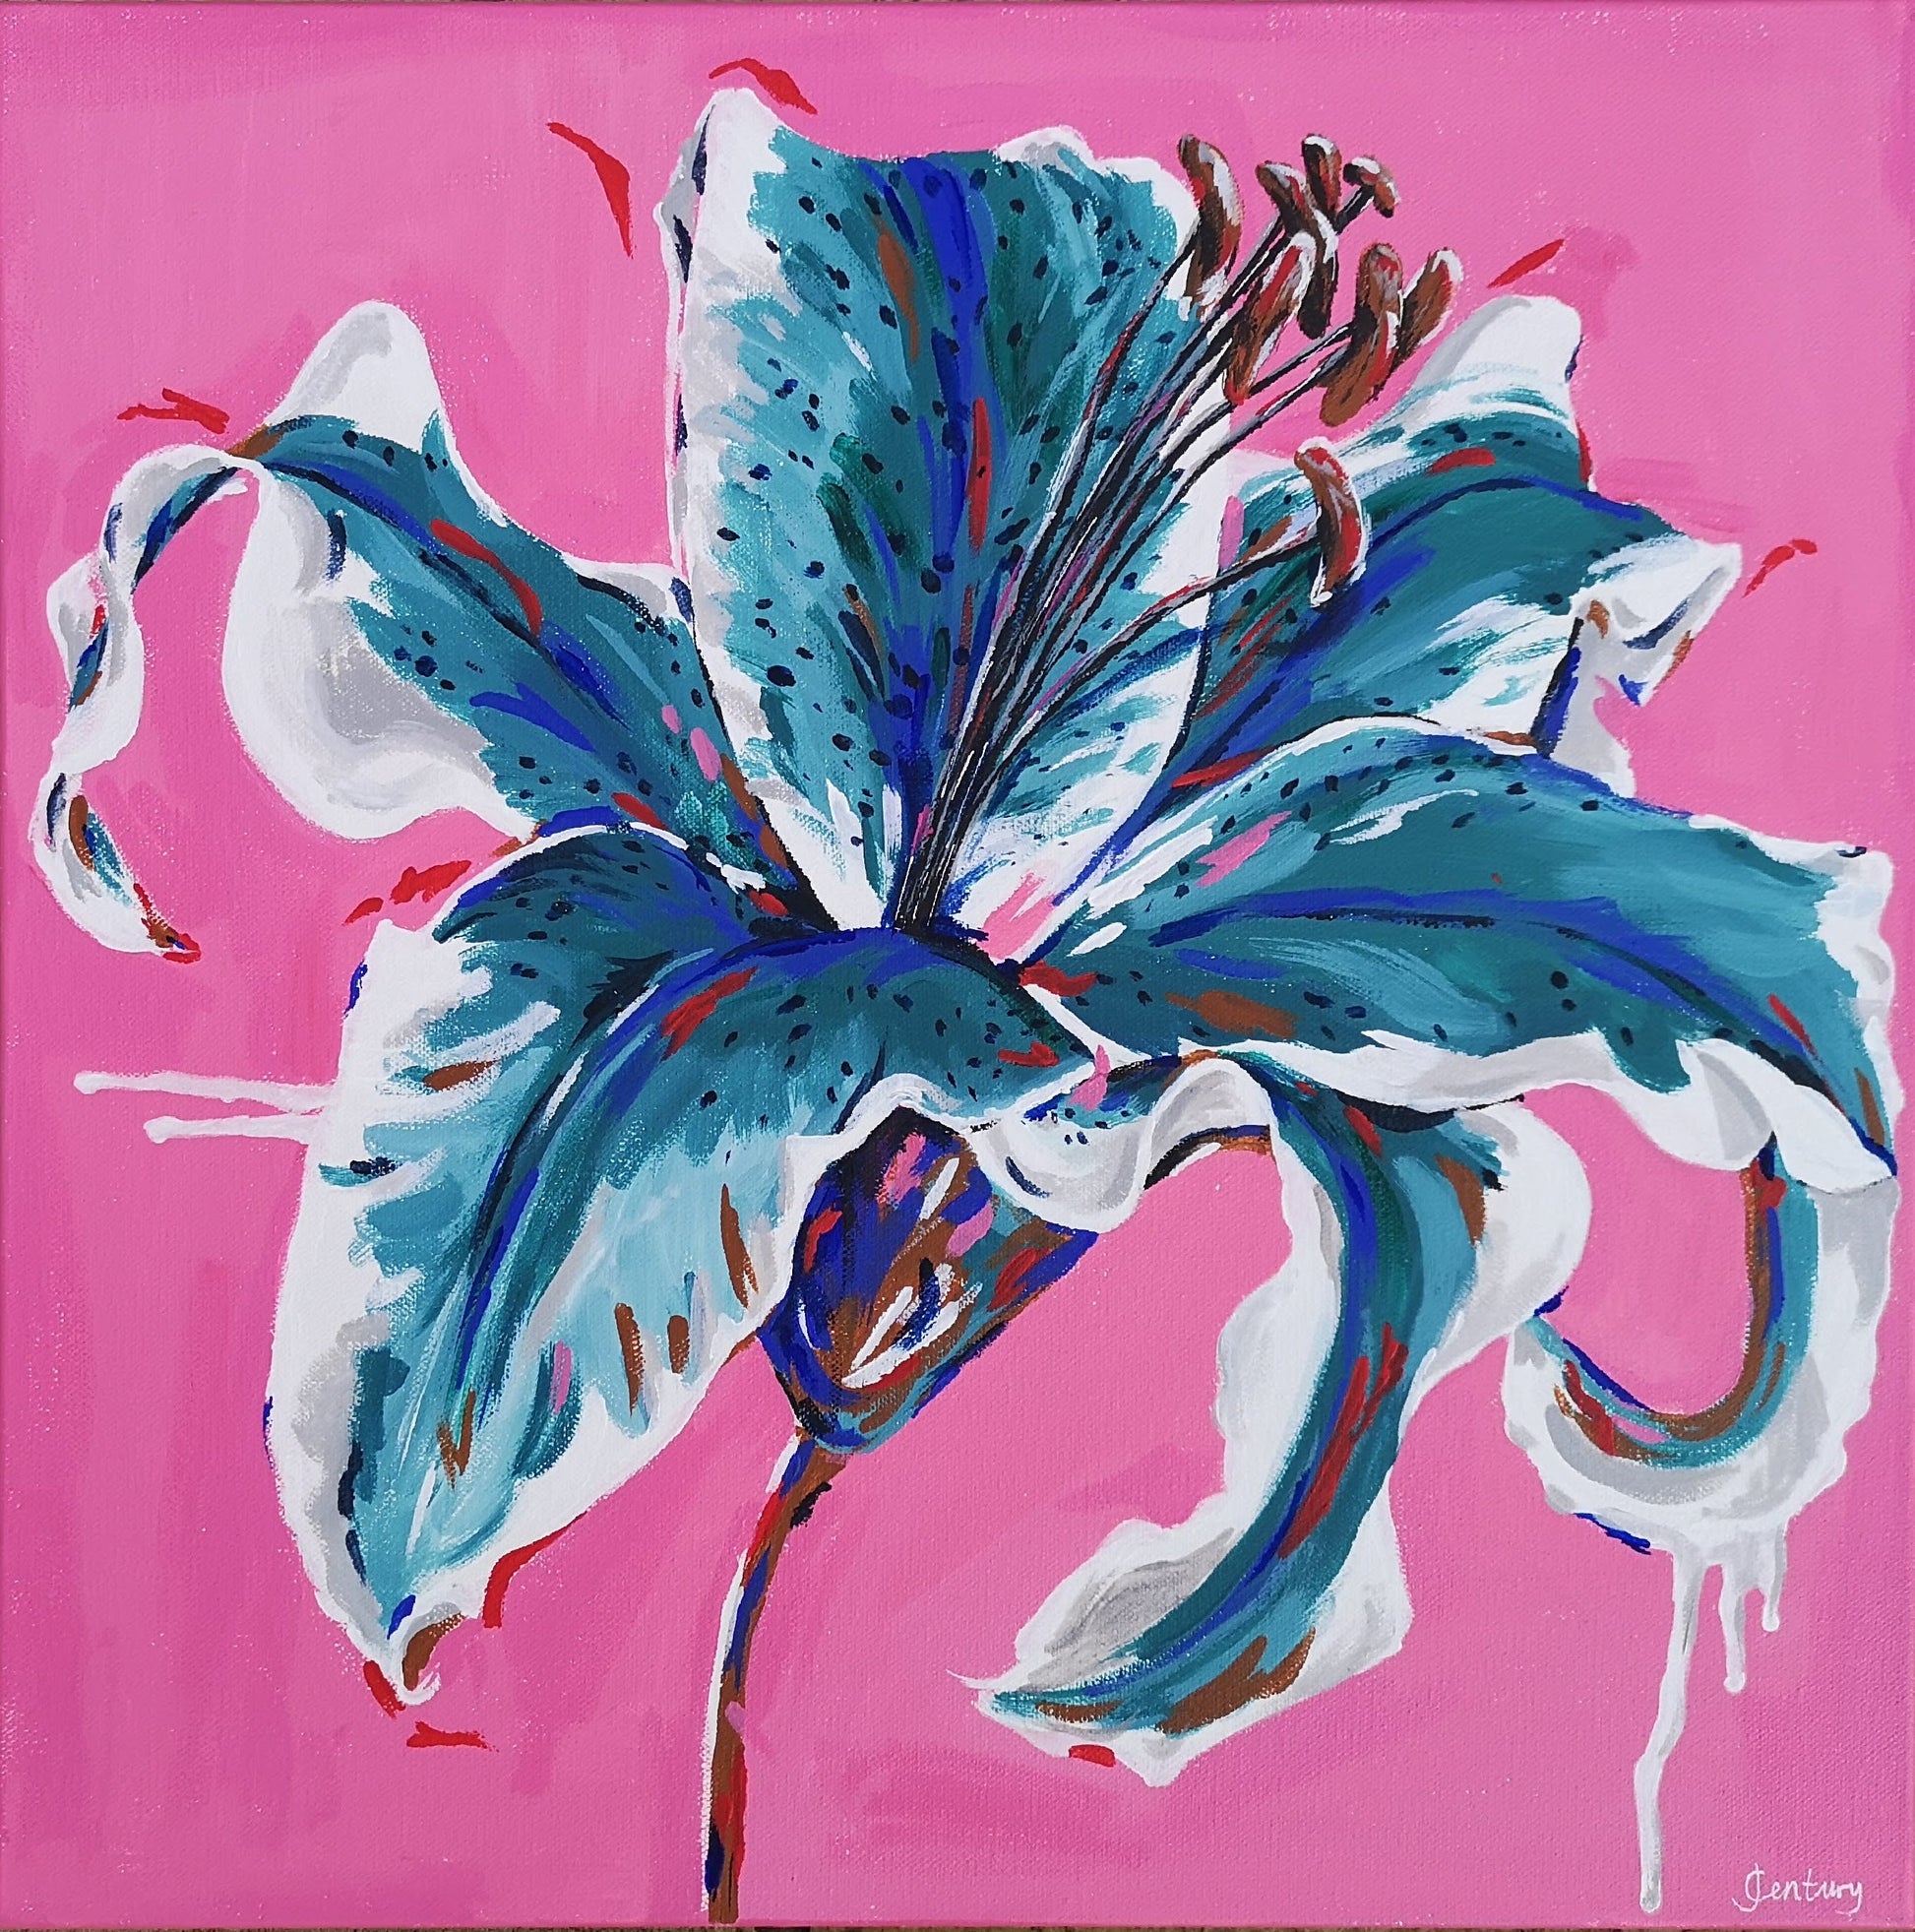 Contemporary Floral Abstract Canvas Painting of Colourful Lily Flower by Judy Century. Bright pink background with teal, blue and white flower